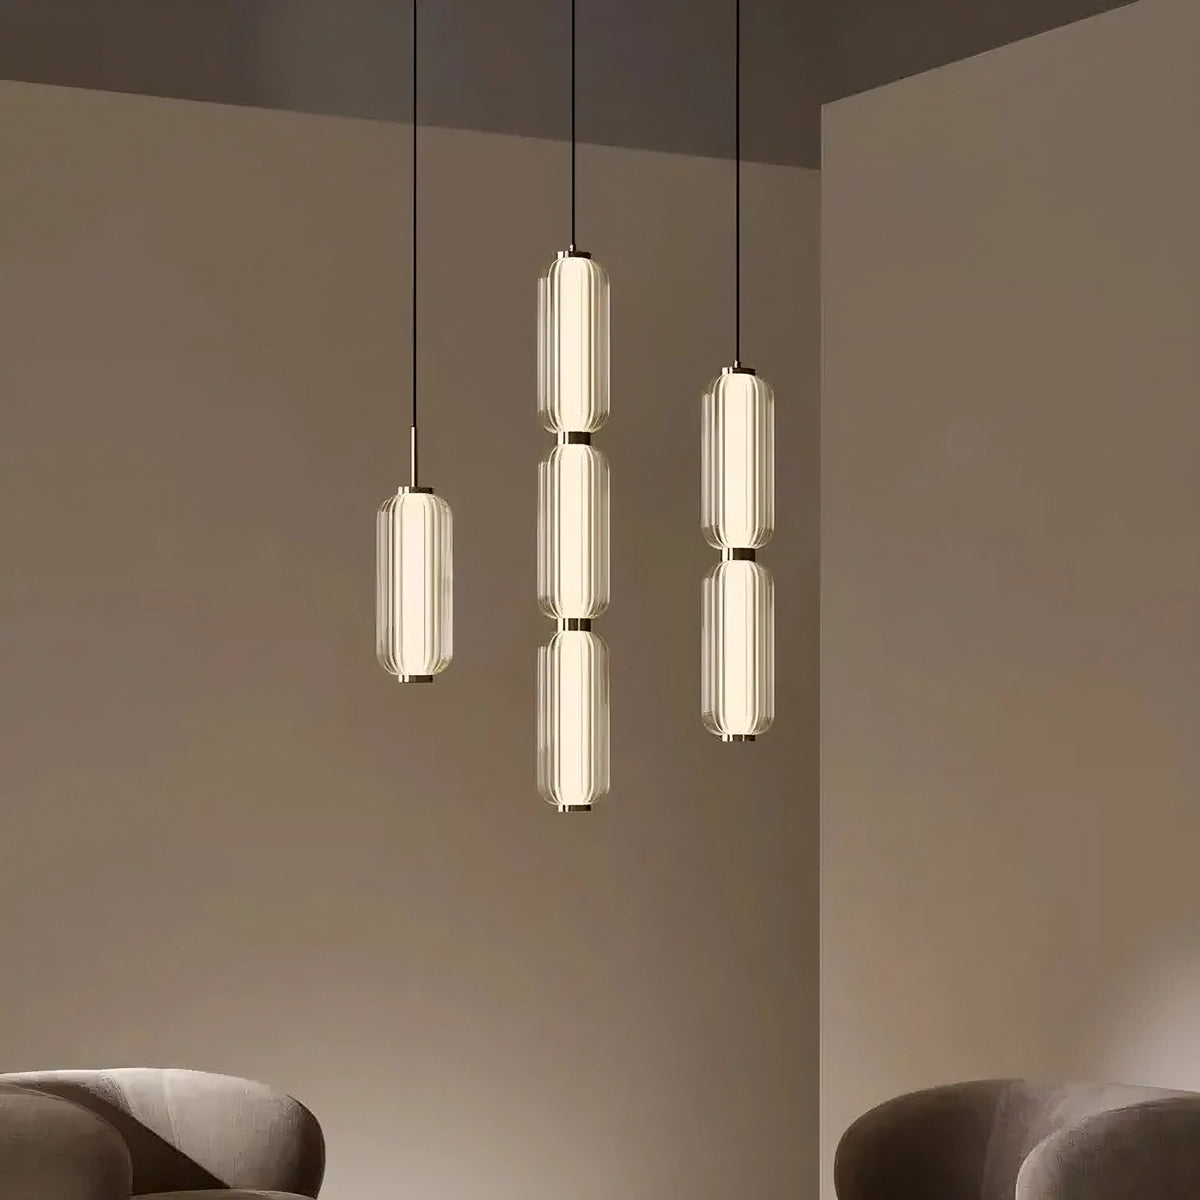 A minimalist room features three vertically aligned Modern Minimalist LED Pendant Light Fixture by Morsale.com with elongated, ribbed glass shades hanging from the ceiling. Two modern, curved beige armchairs are positioned in the foreground, complementing a neutral and calming setting enhanced by subtle touches of natural marble.